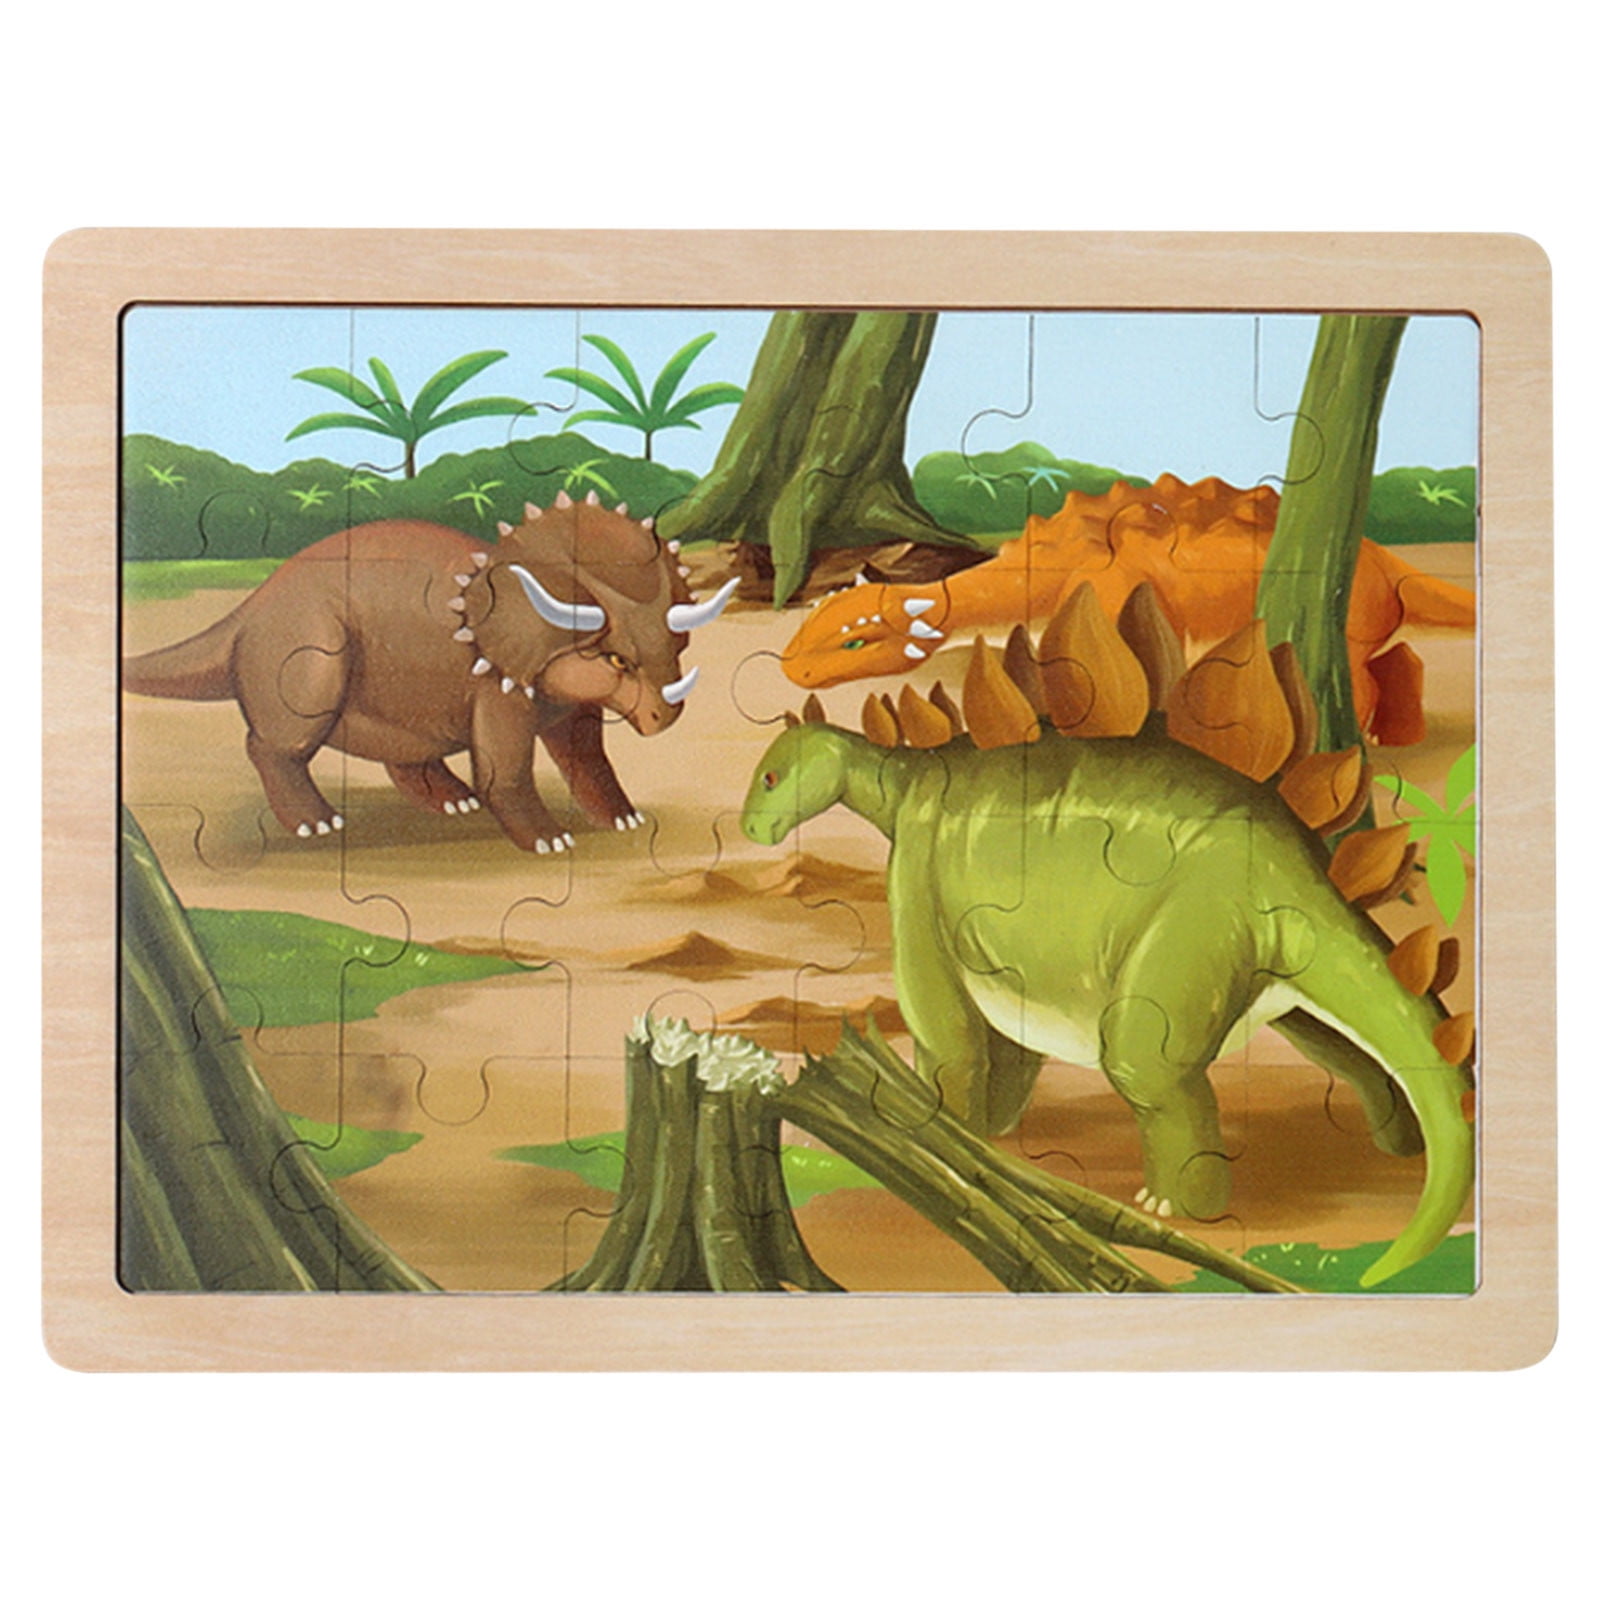 Fridja Wooden Jigsaw Puzzles for Kids Ages 3-5 Years Old 24 Pieces,  Preschool Puzzle Toy Gift for Children Boys and Girls, Dinosaur Animal  Construction Theme 